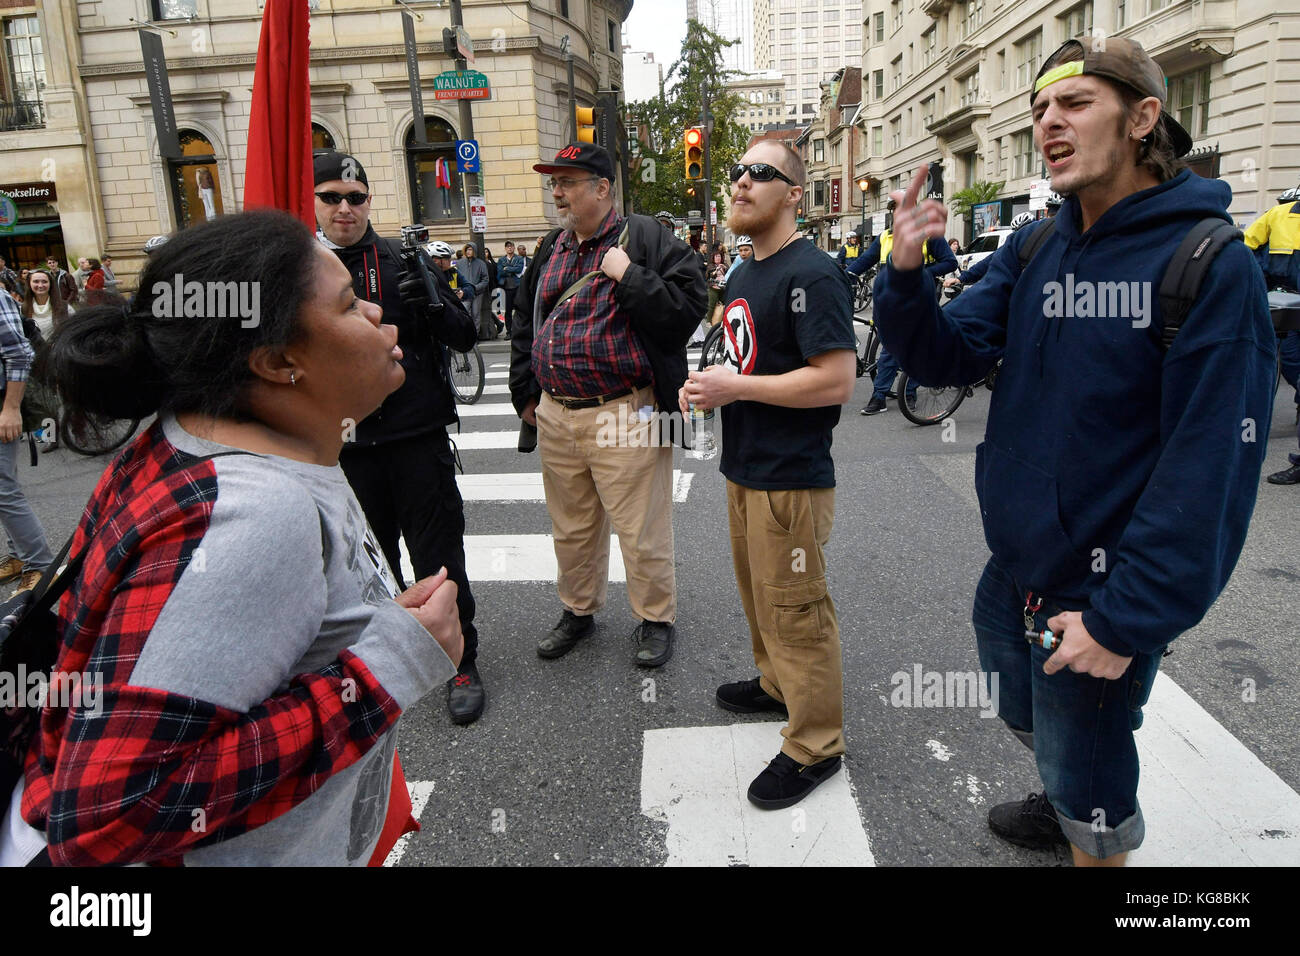 Philadelphia, United States. 04th Nov, 2017. Protestors participating in a Refuse Fascism rally engage in discussion with counter-protestors, including white supremacists, during a Anti-Trump/Pence protest in Center City, on November 4, 2017, in Philadelphia, PA. At least one arrest was made and one received medial attention after an altercation between the two groups. Credit: Bastiaan Slabbers/Alamy Live News Stock Photo